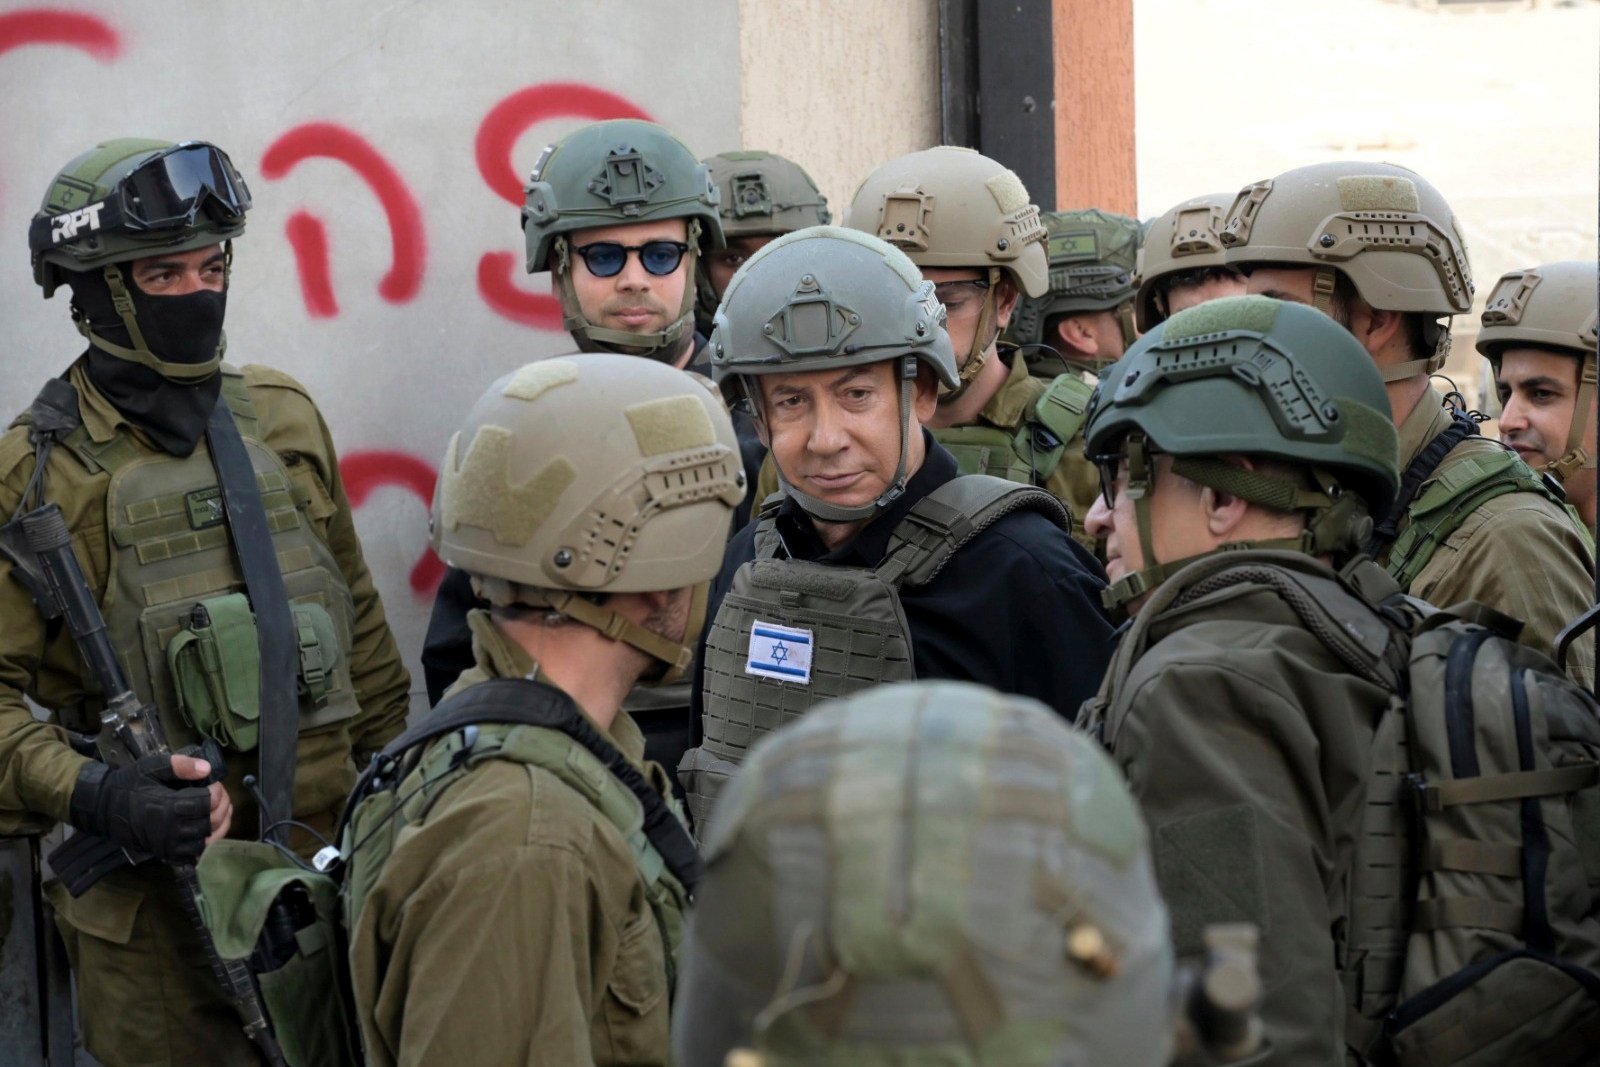 Israeli Prime Minister Benjamin Netanyahu receives a security briefing with commanders and soldiers in the northern Gaza Strip, on Monday. Photo: Avi Ohayon/GPO via Reuters